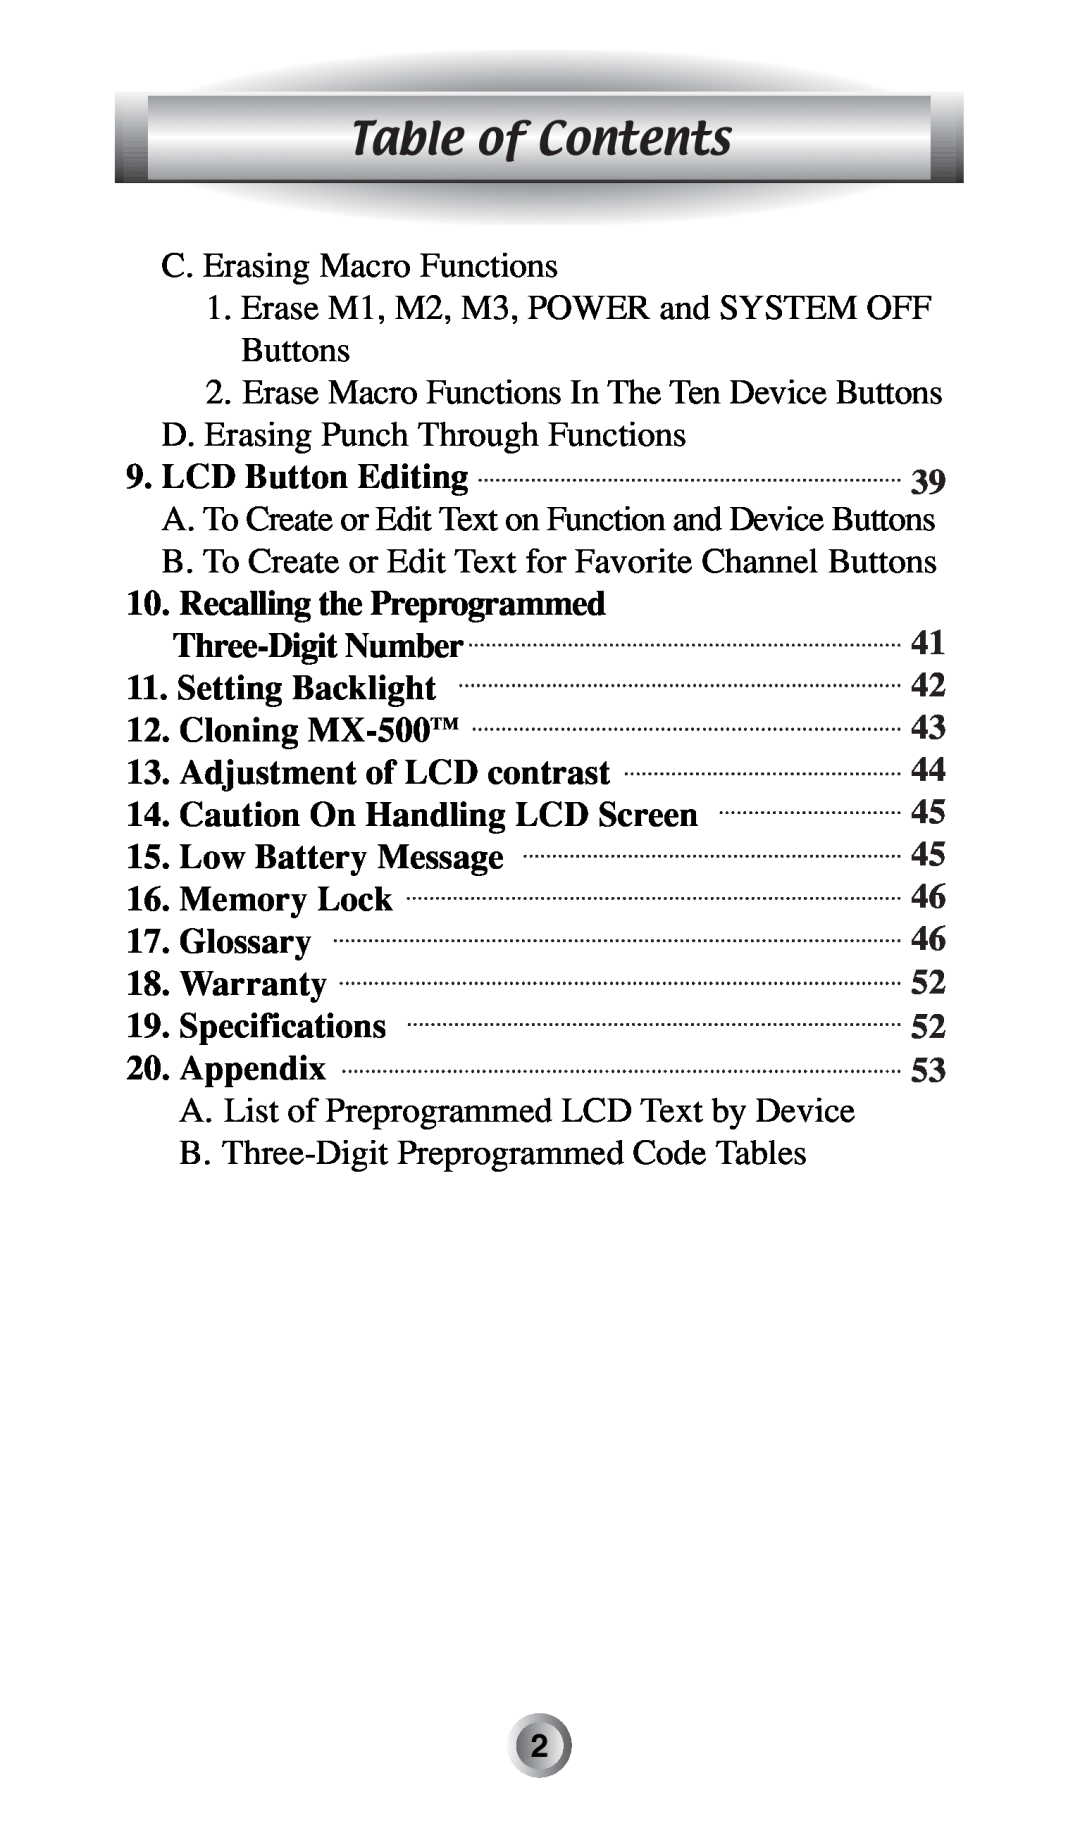 Radio Shack MX-500TM manual Table of Contents, Recalling the Preprogrammed 